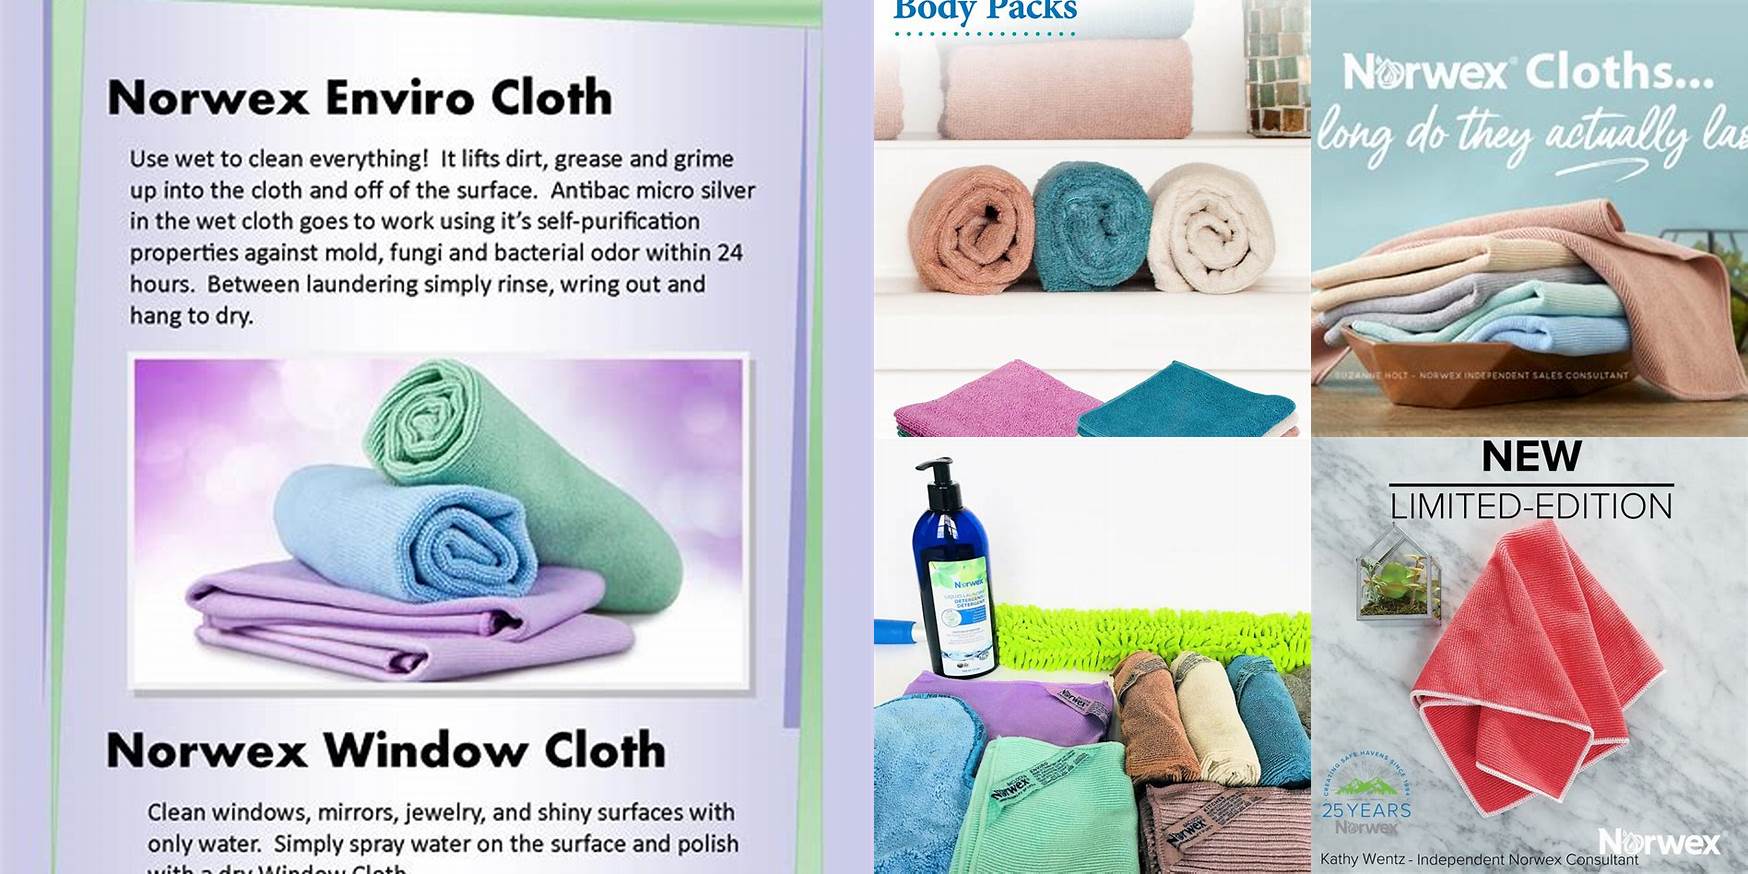 How Long Does Norwex Cloths Last